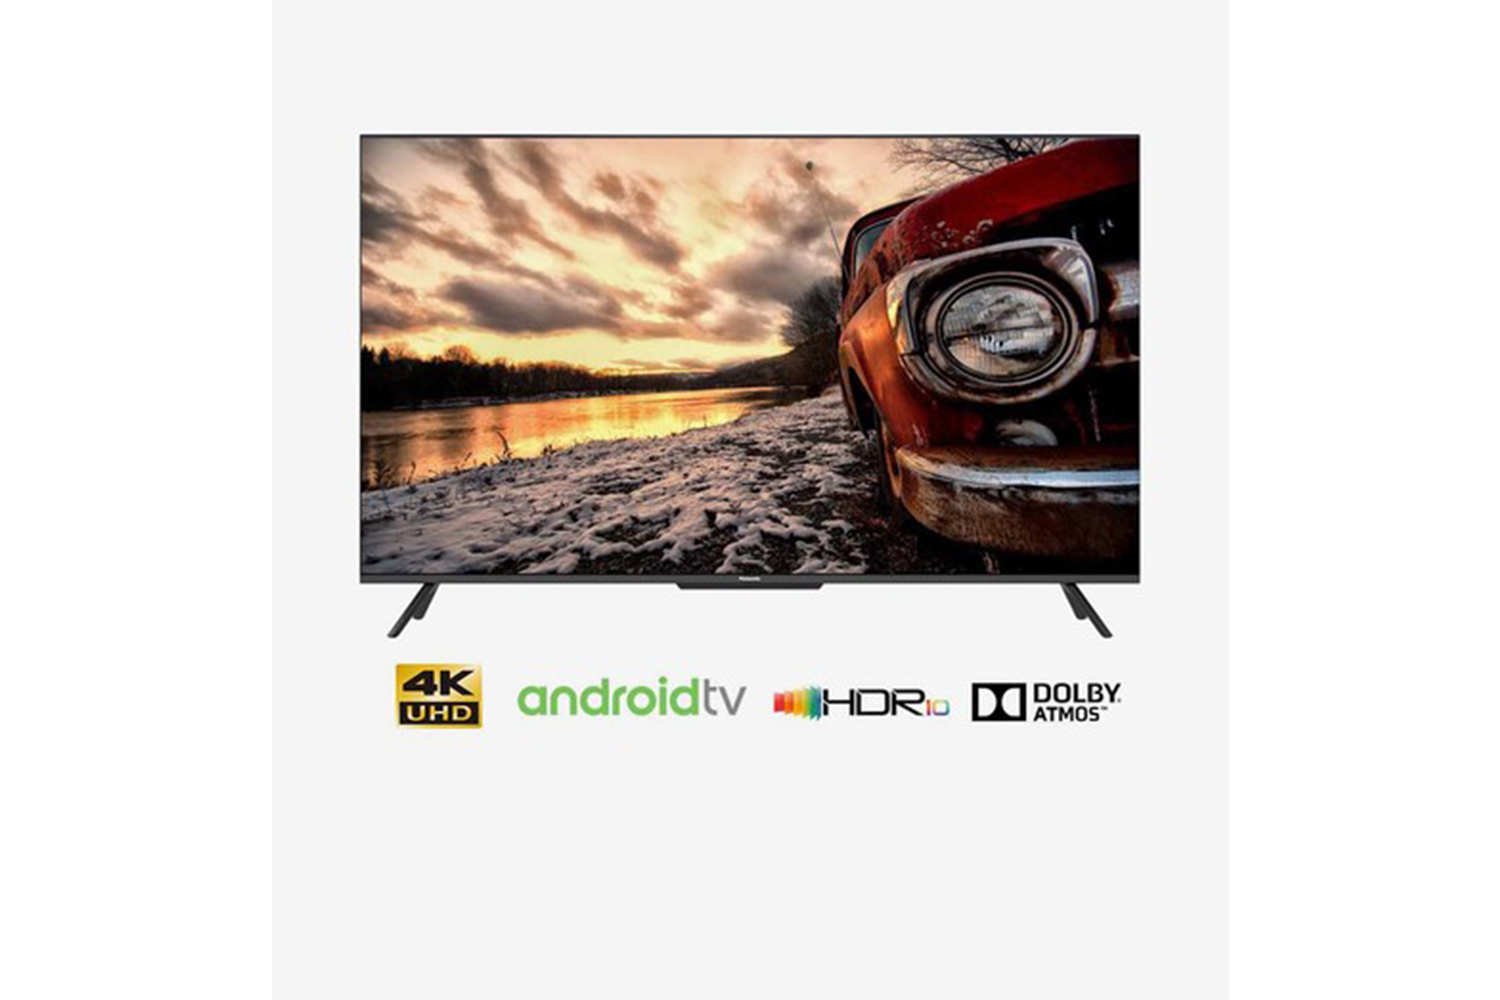 Panasonic 165cm (65 Inch) Ultra HD 4K LED Android Smart TV (Dolby Atmos, TH-65JX850DX, Black)